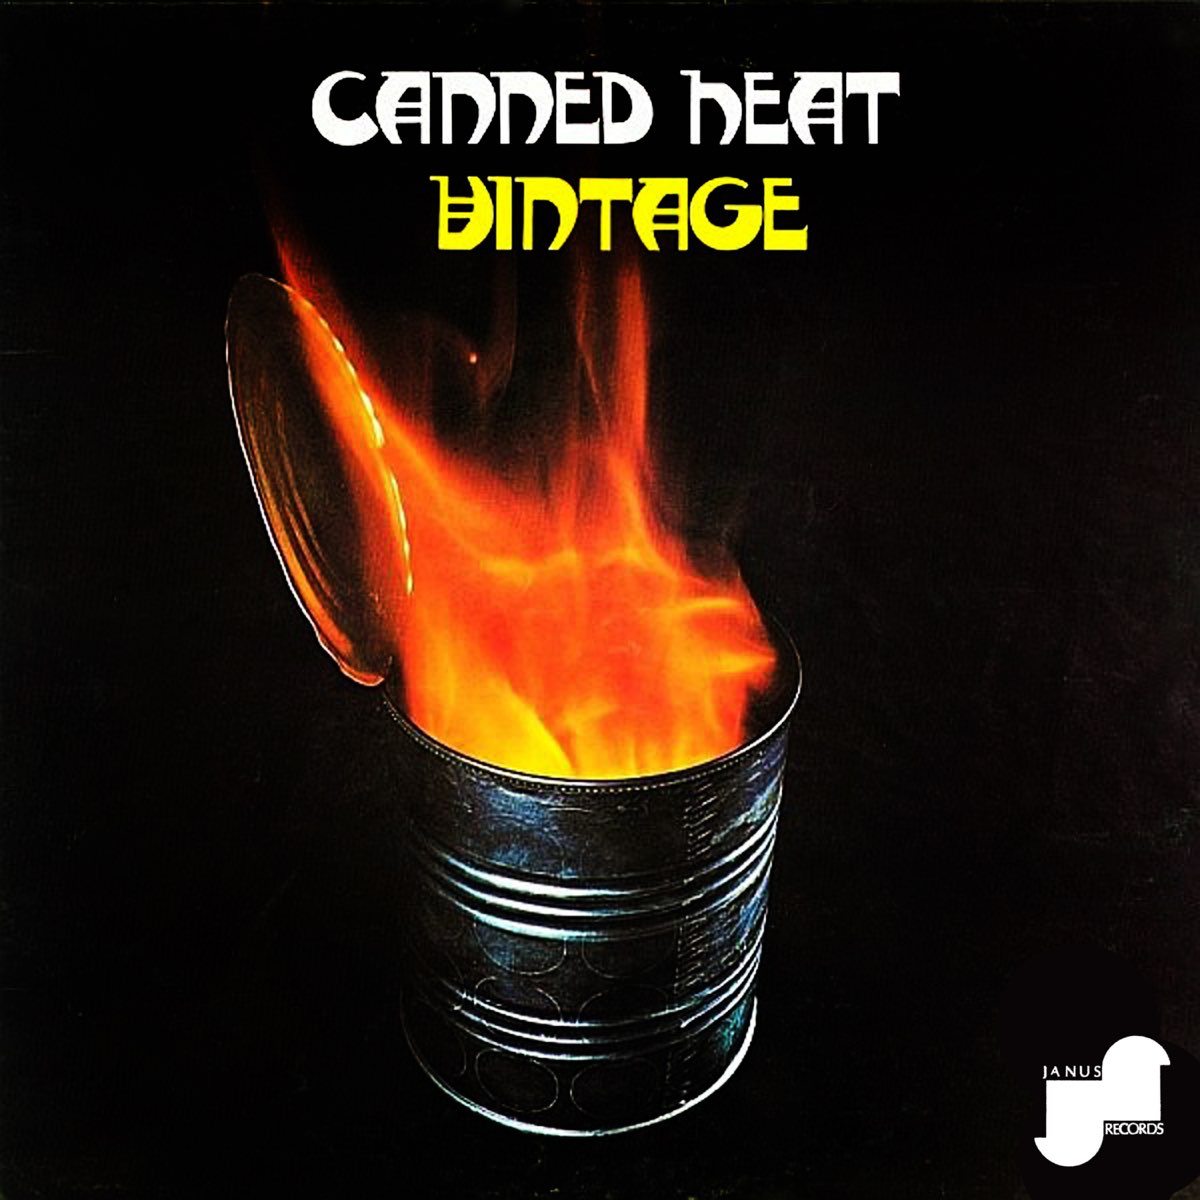 Canned heat steam фото 64